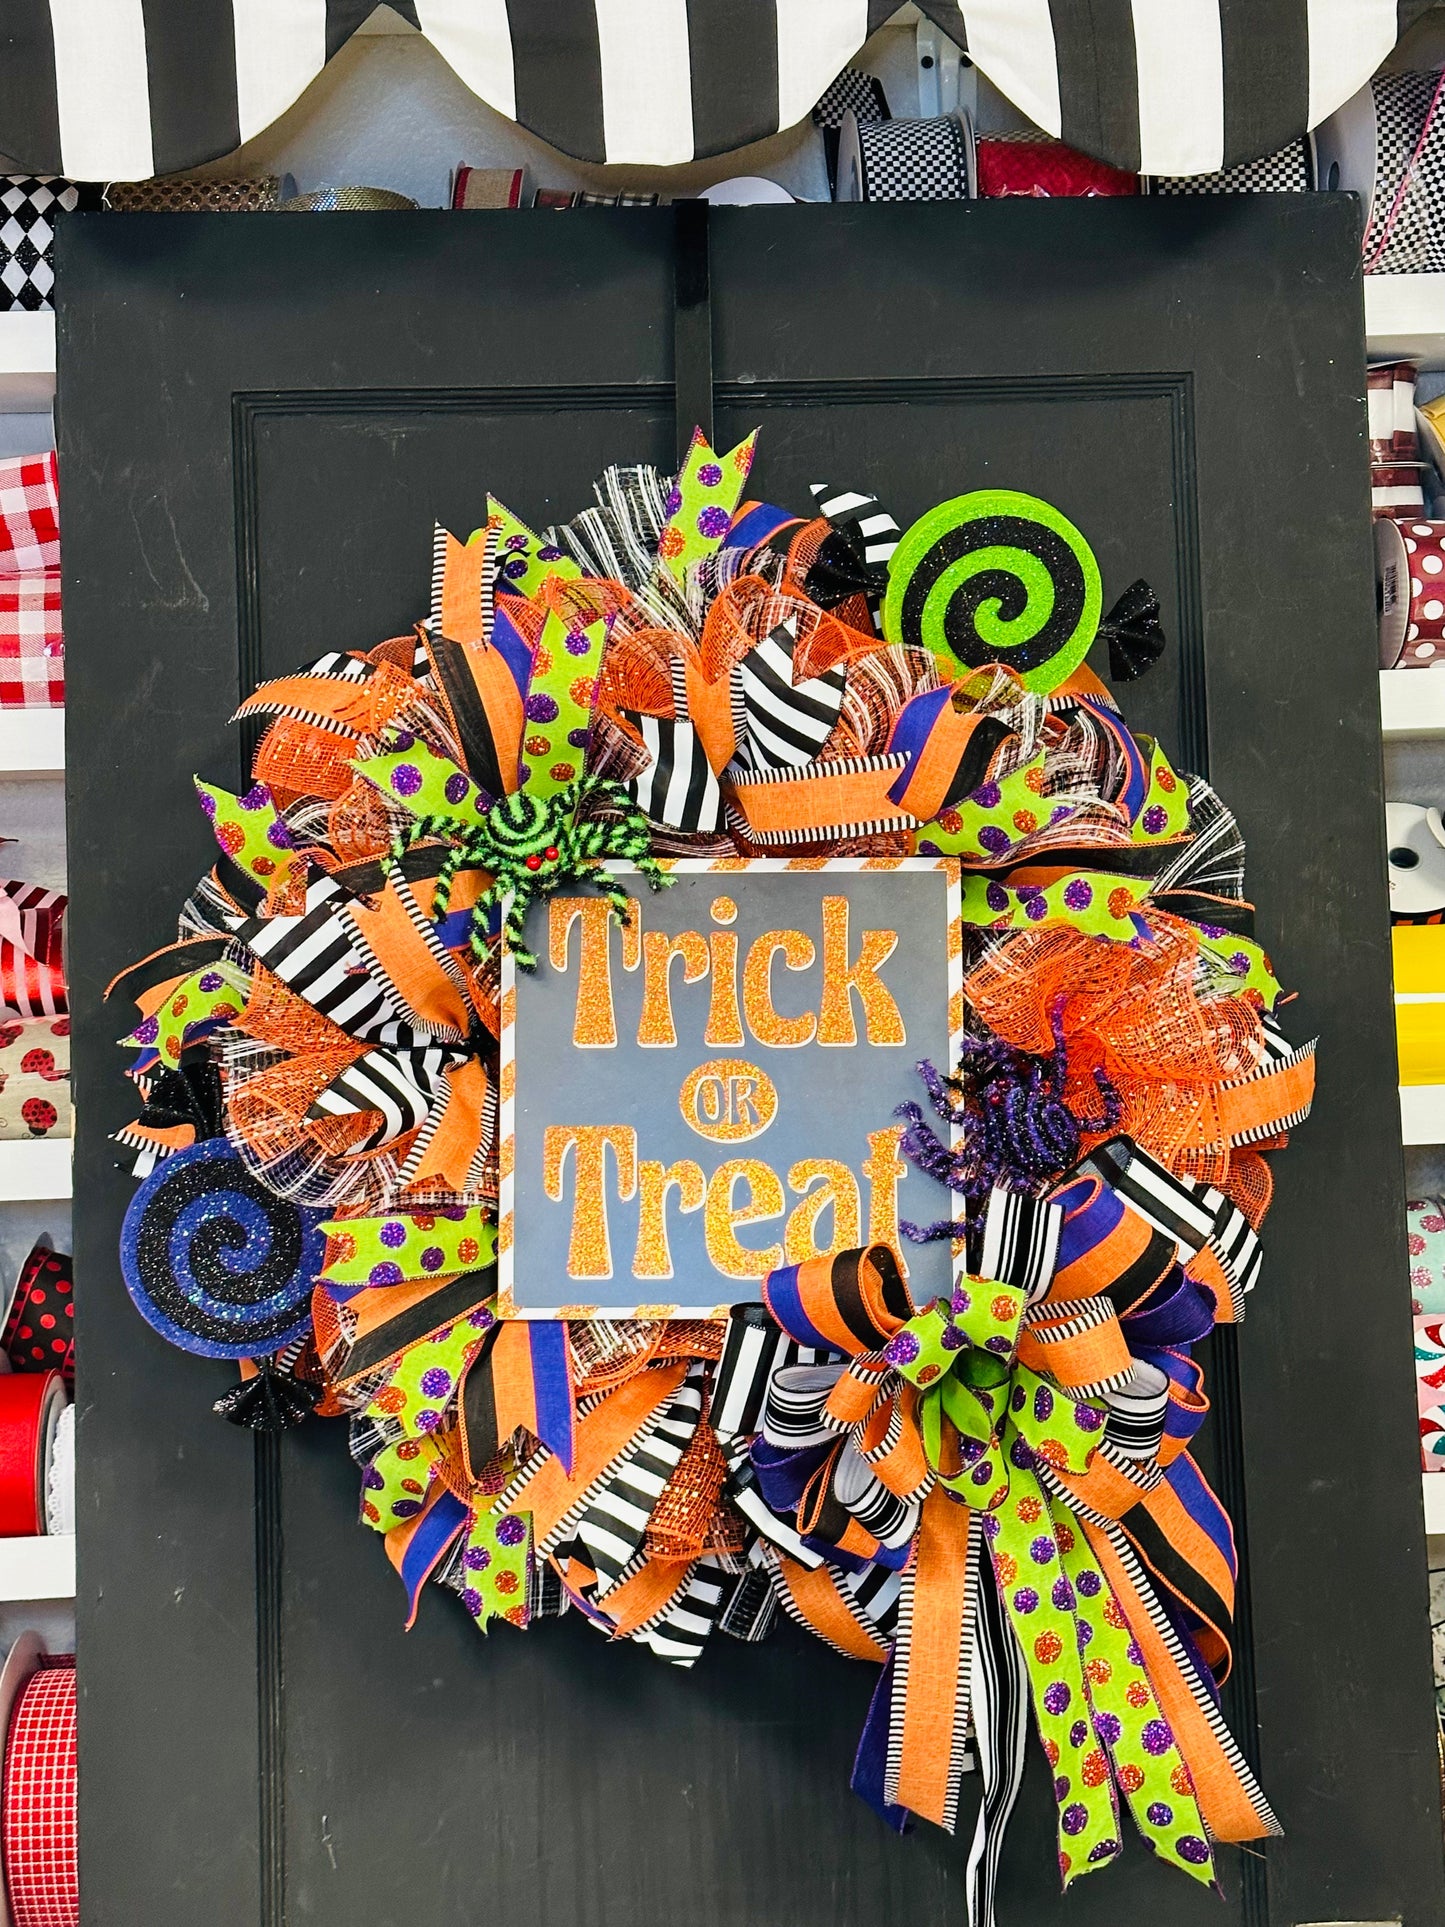 Party Kit - Trick or Treat Halloween Party Kit